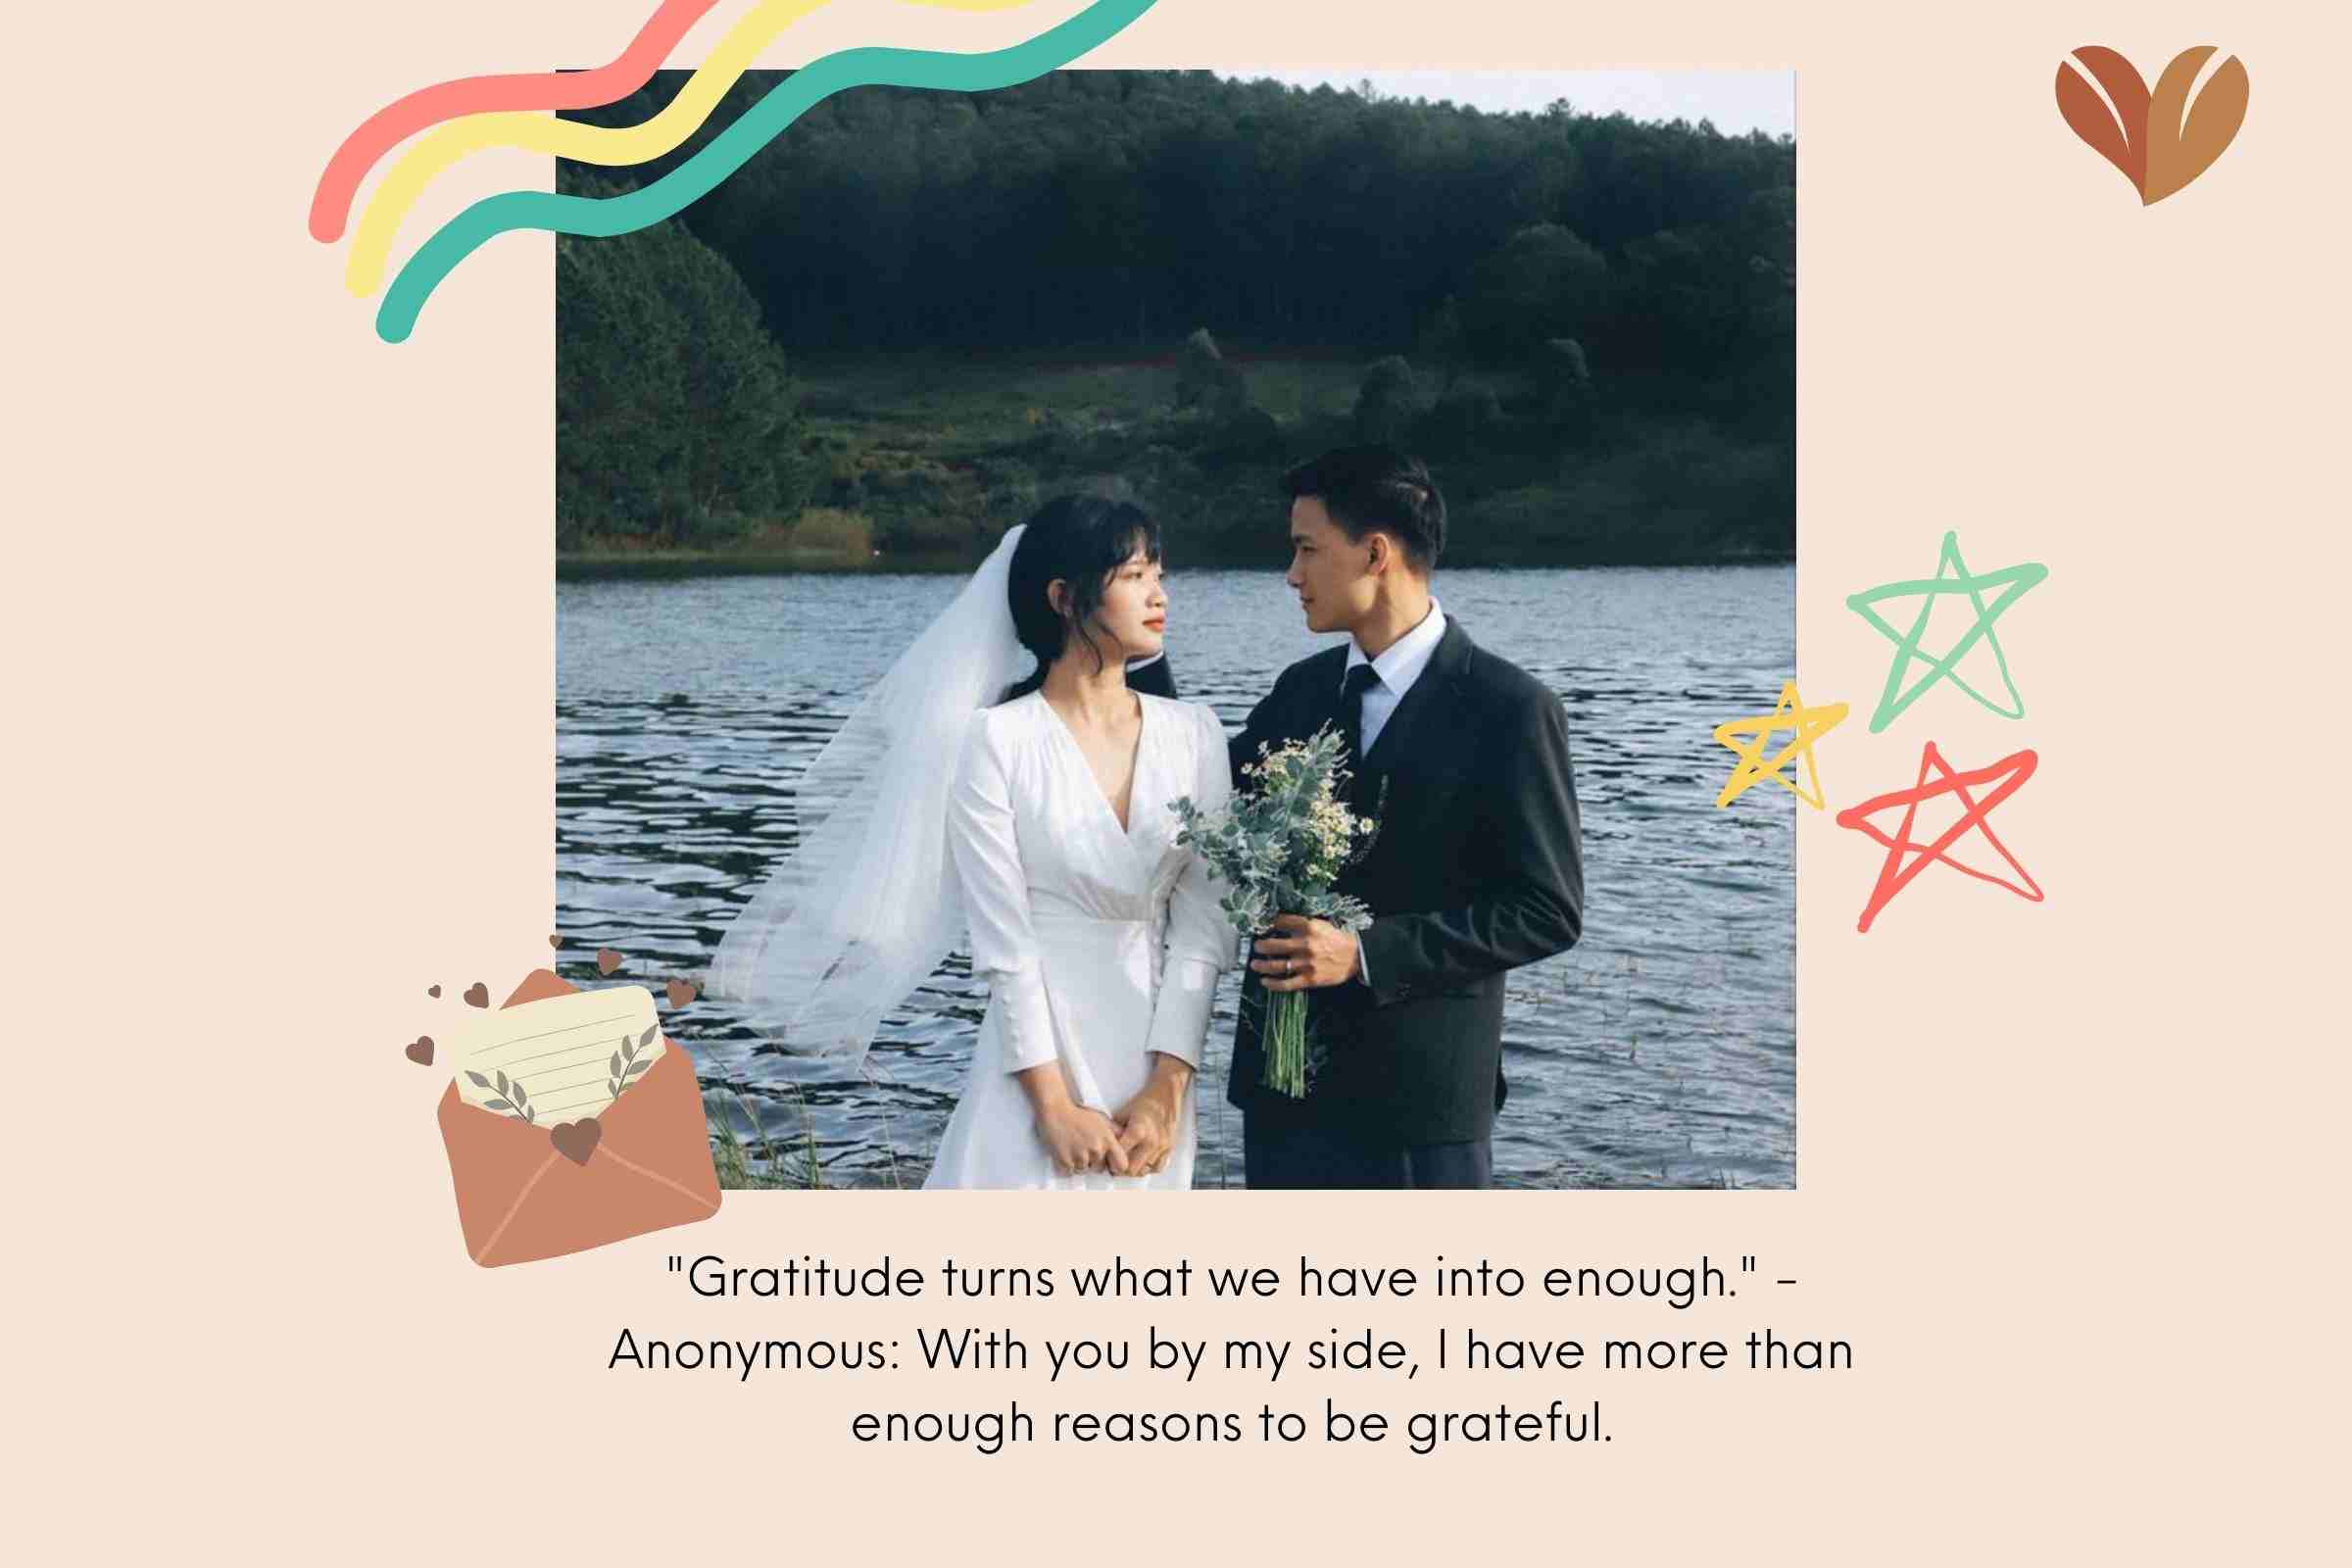 "Gratitude turns what we have into enough." - Anonymous: With you by my side, I have more than enough reasons to be grateful.